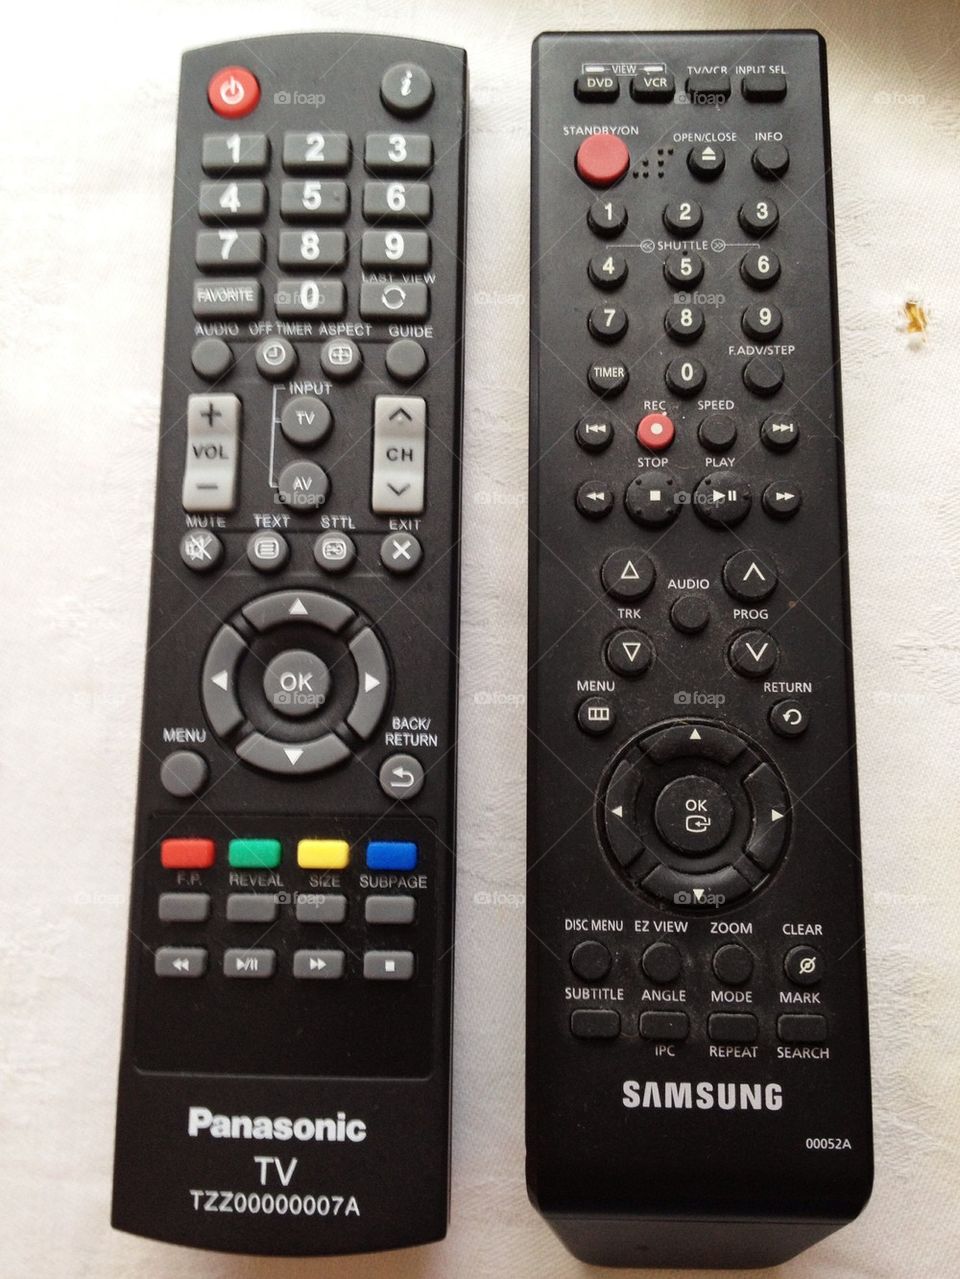 Remote controllers